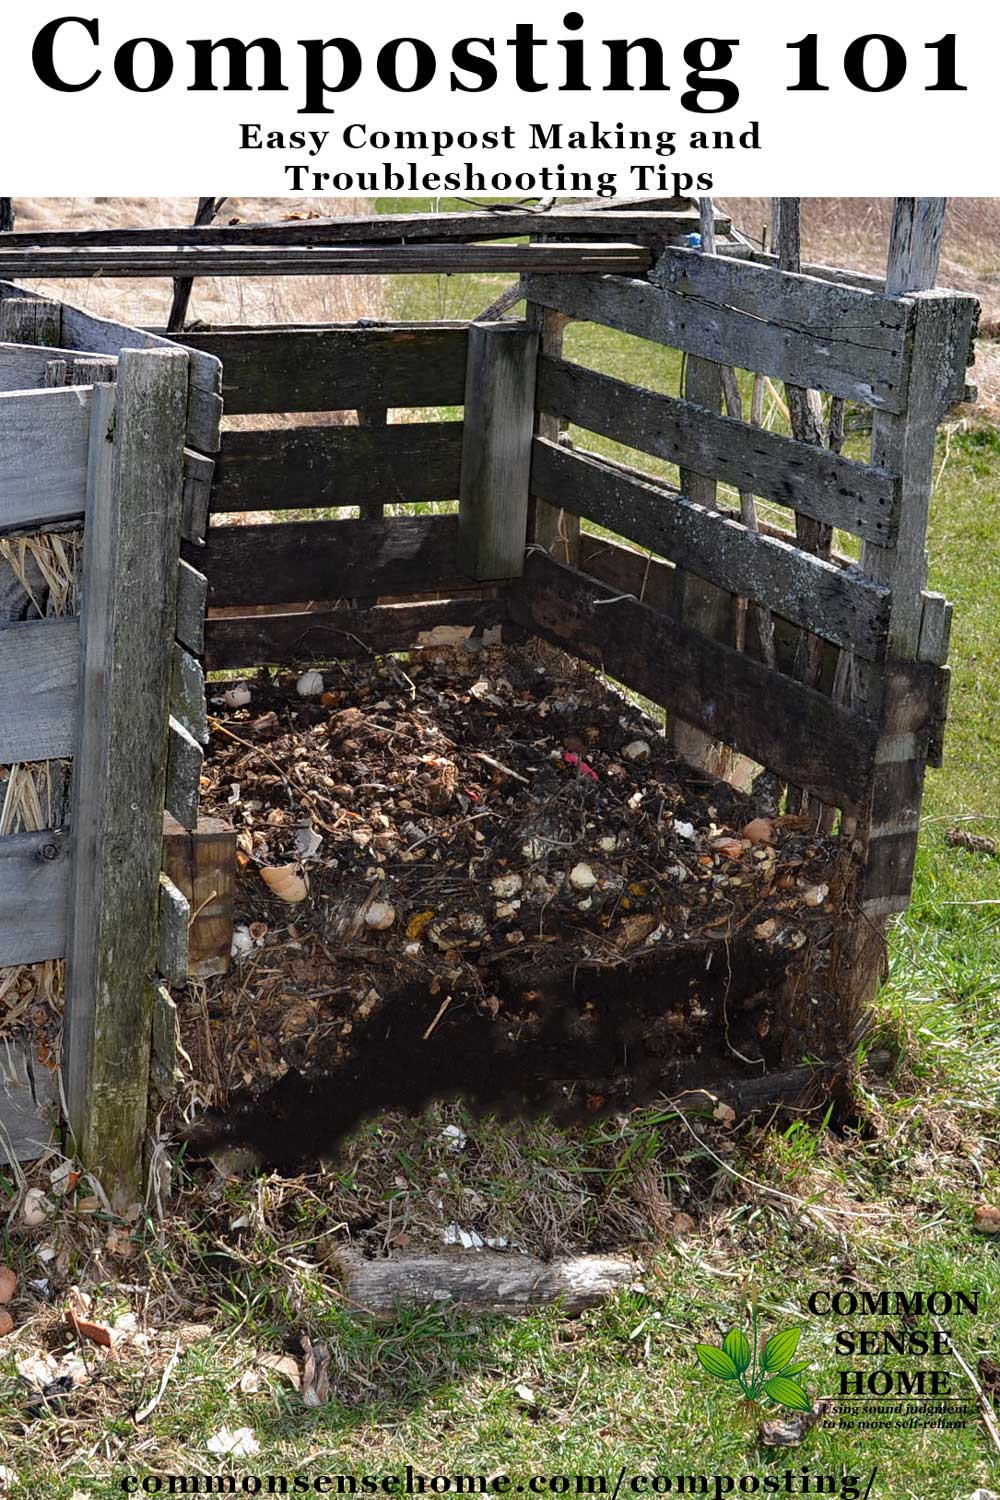 composting 101 - easy compost making and troubleshooting tips